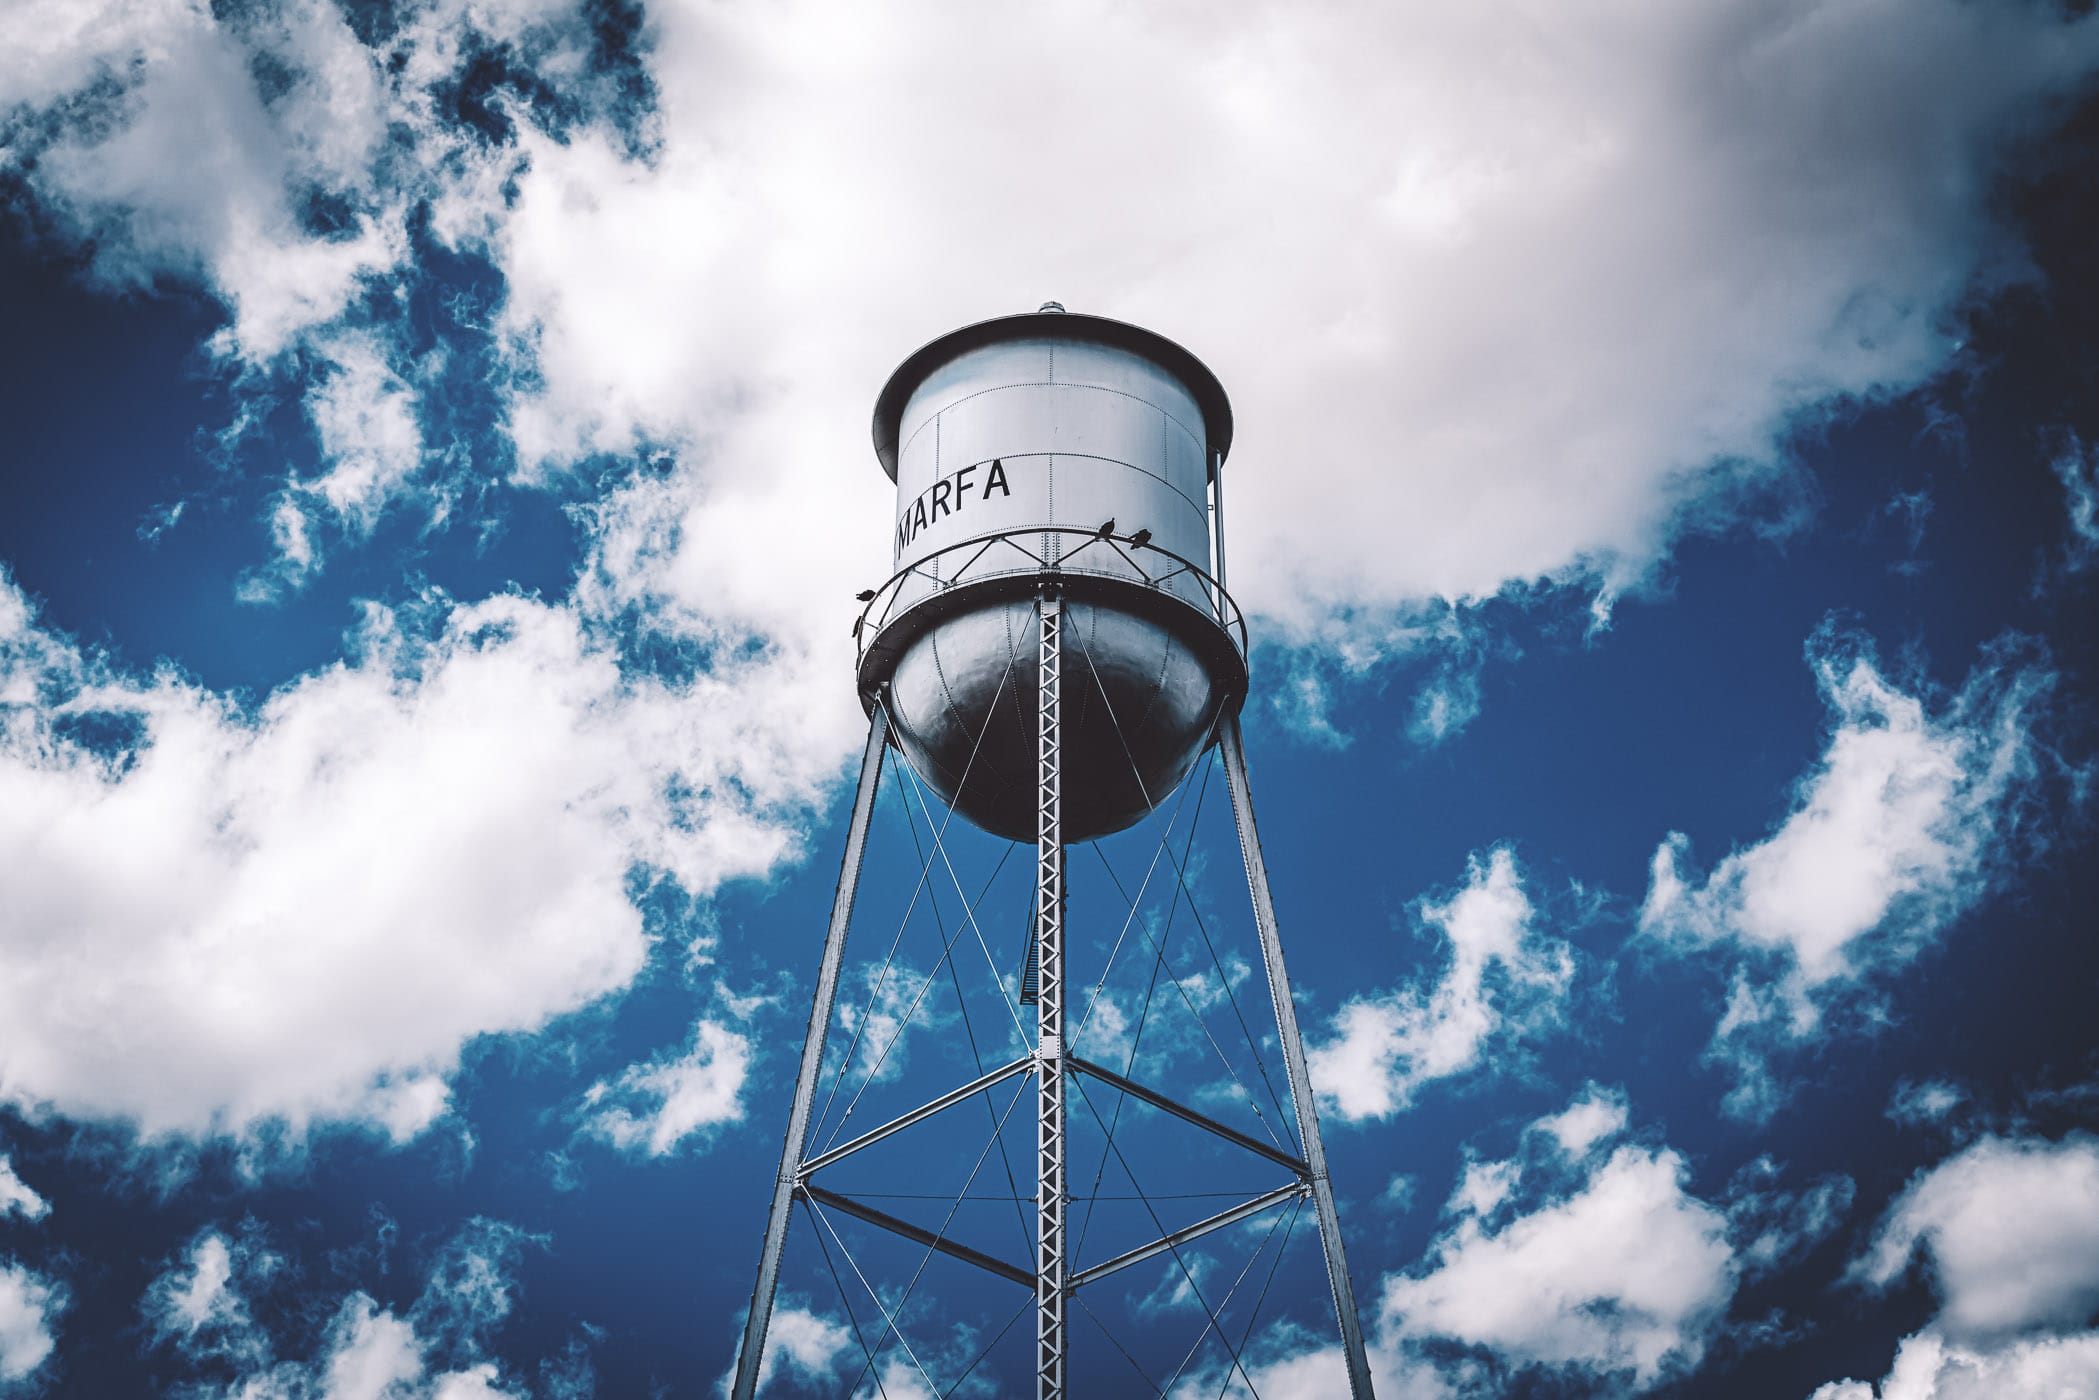 Marfa, Texas' water tower stands among the West Texas clouds.